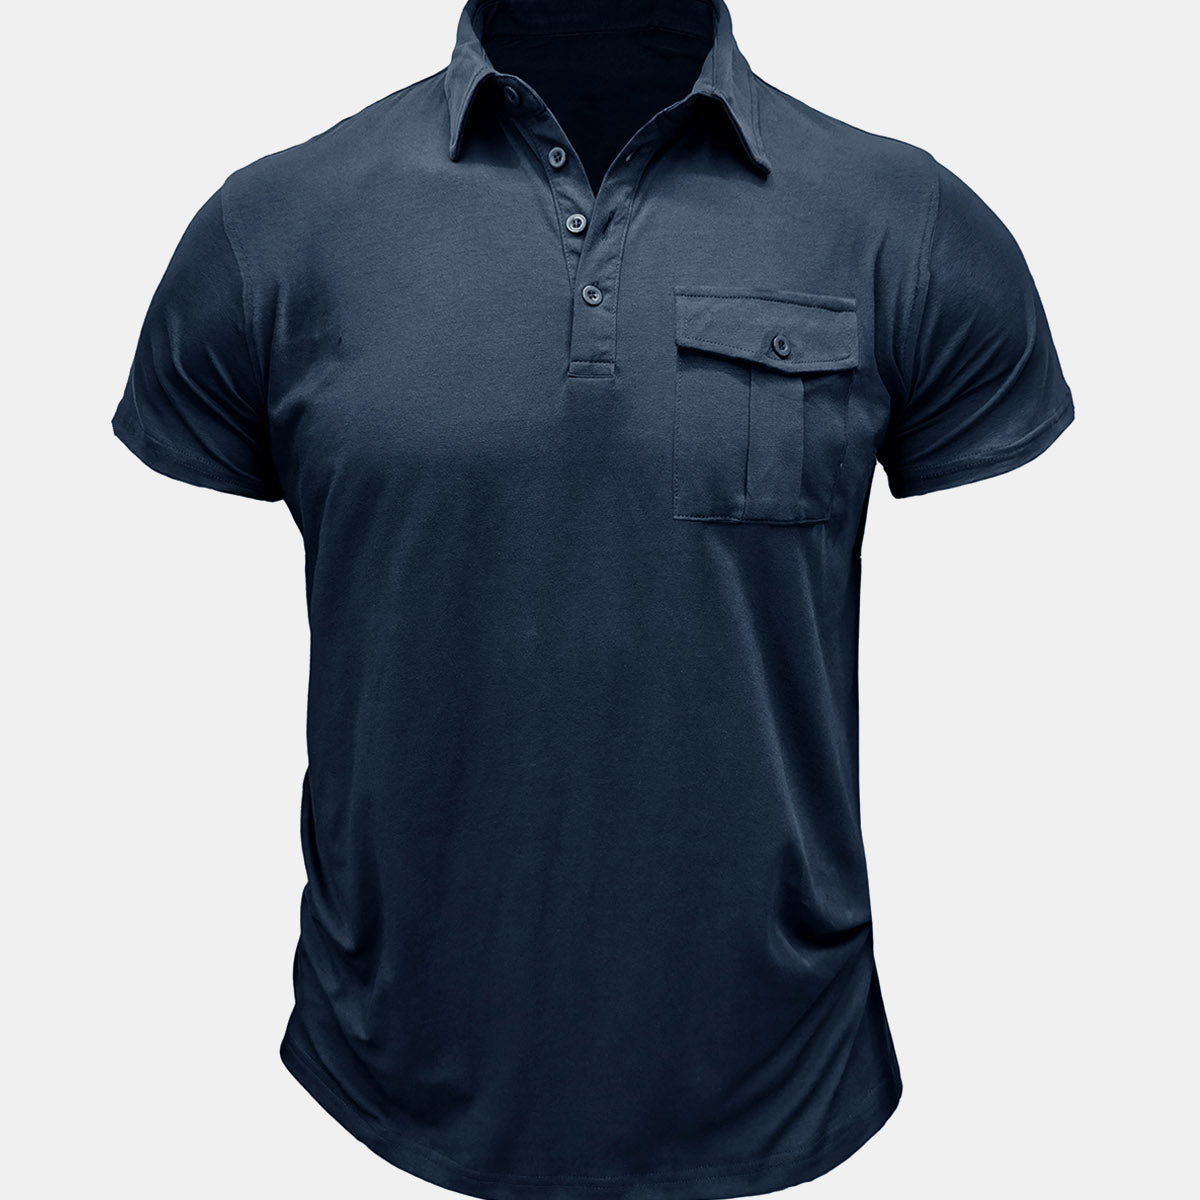 Men's Summer Casual Breathable Cotton Pocket Solid Color Short Sleeve Polo Shirt